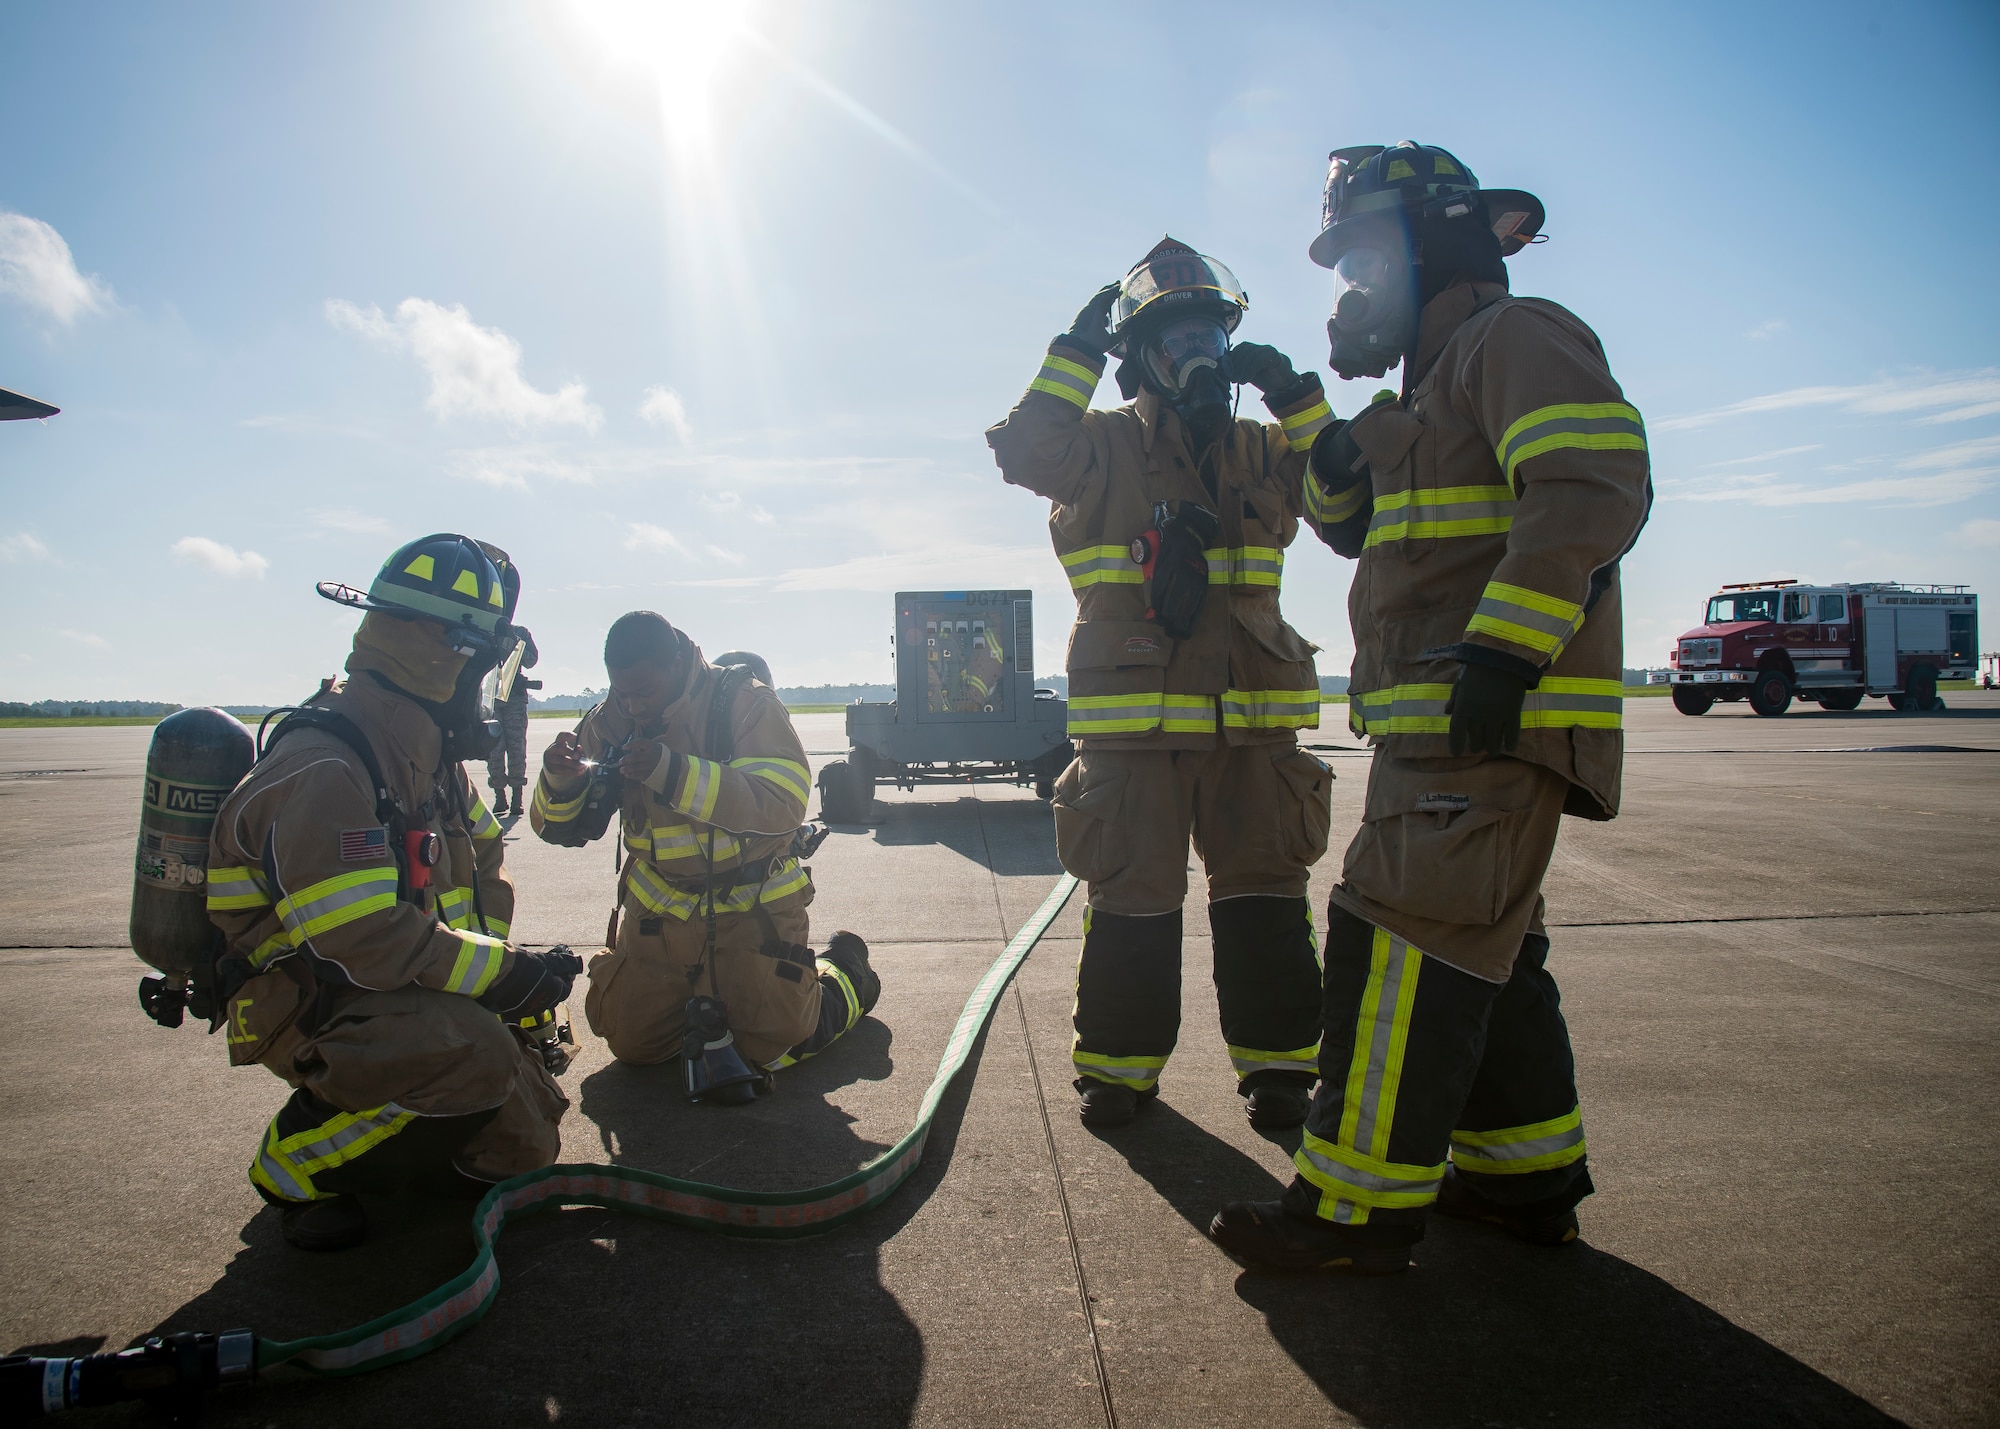 Firefighters from the 23d Civil Engineer Squadron (CES), don personal protective gear prior to HC-130J Combat King II egress training, July 11, 2019, at Moody Air Force Base, Ga. Firefighters conducted the training to evaluate their overall knowledge and proficiency of how to properly shut down and rescue personnel from a C-130 during an emergency situation. (U.S. Air Force photo by Airman 1st Class Eugene Oliver)